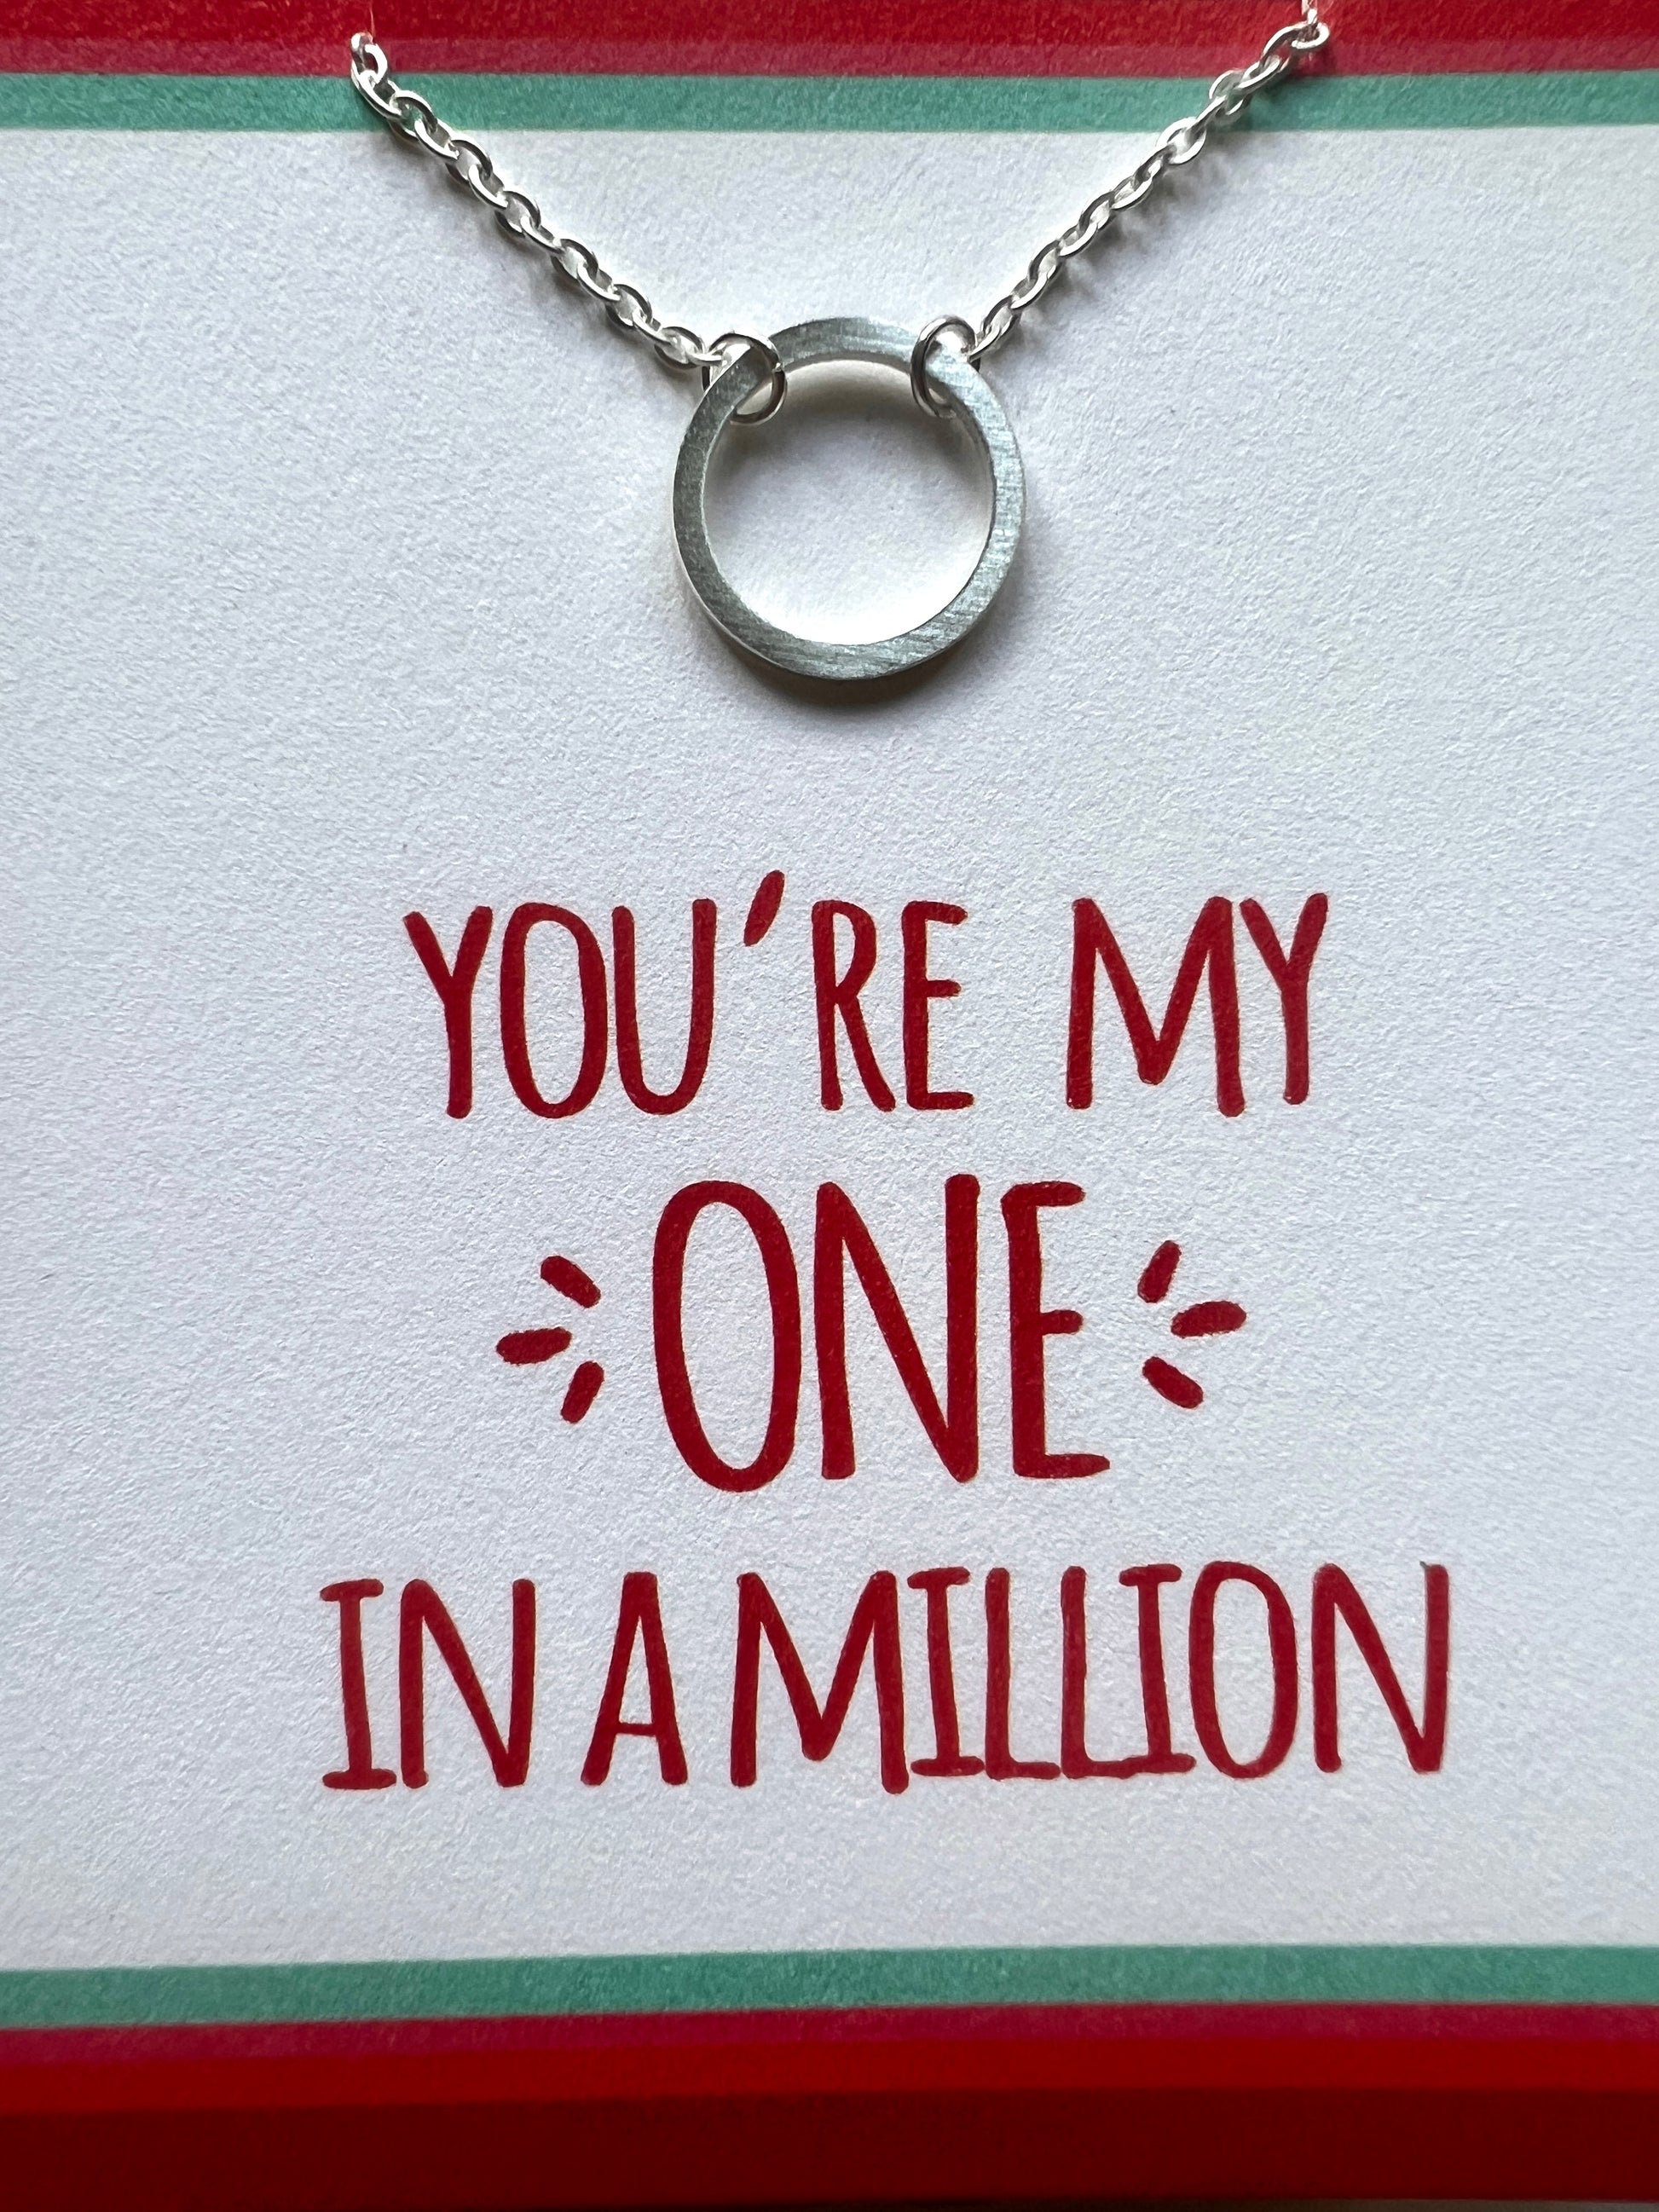 A flat silver ring pendant on a silver chain  mounted on a greetings card which says You're My One in a Million